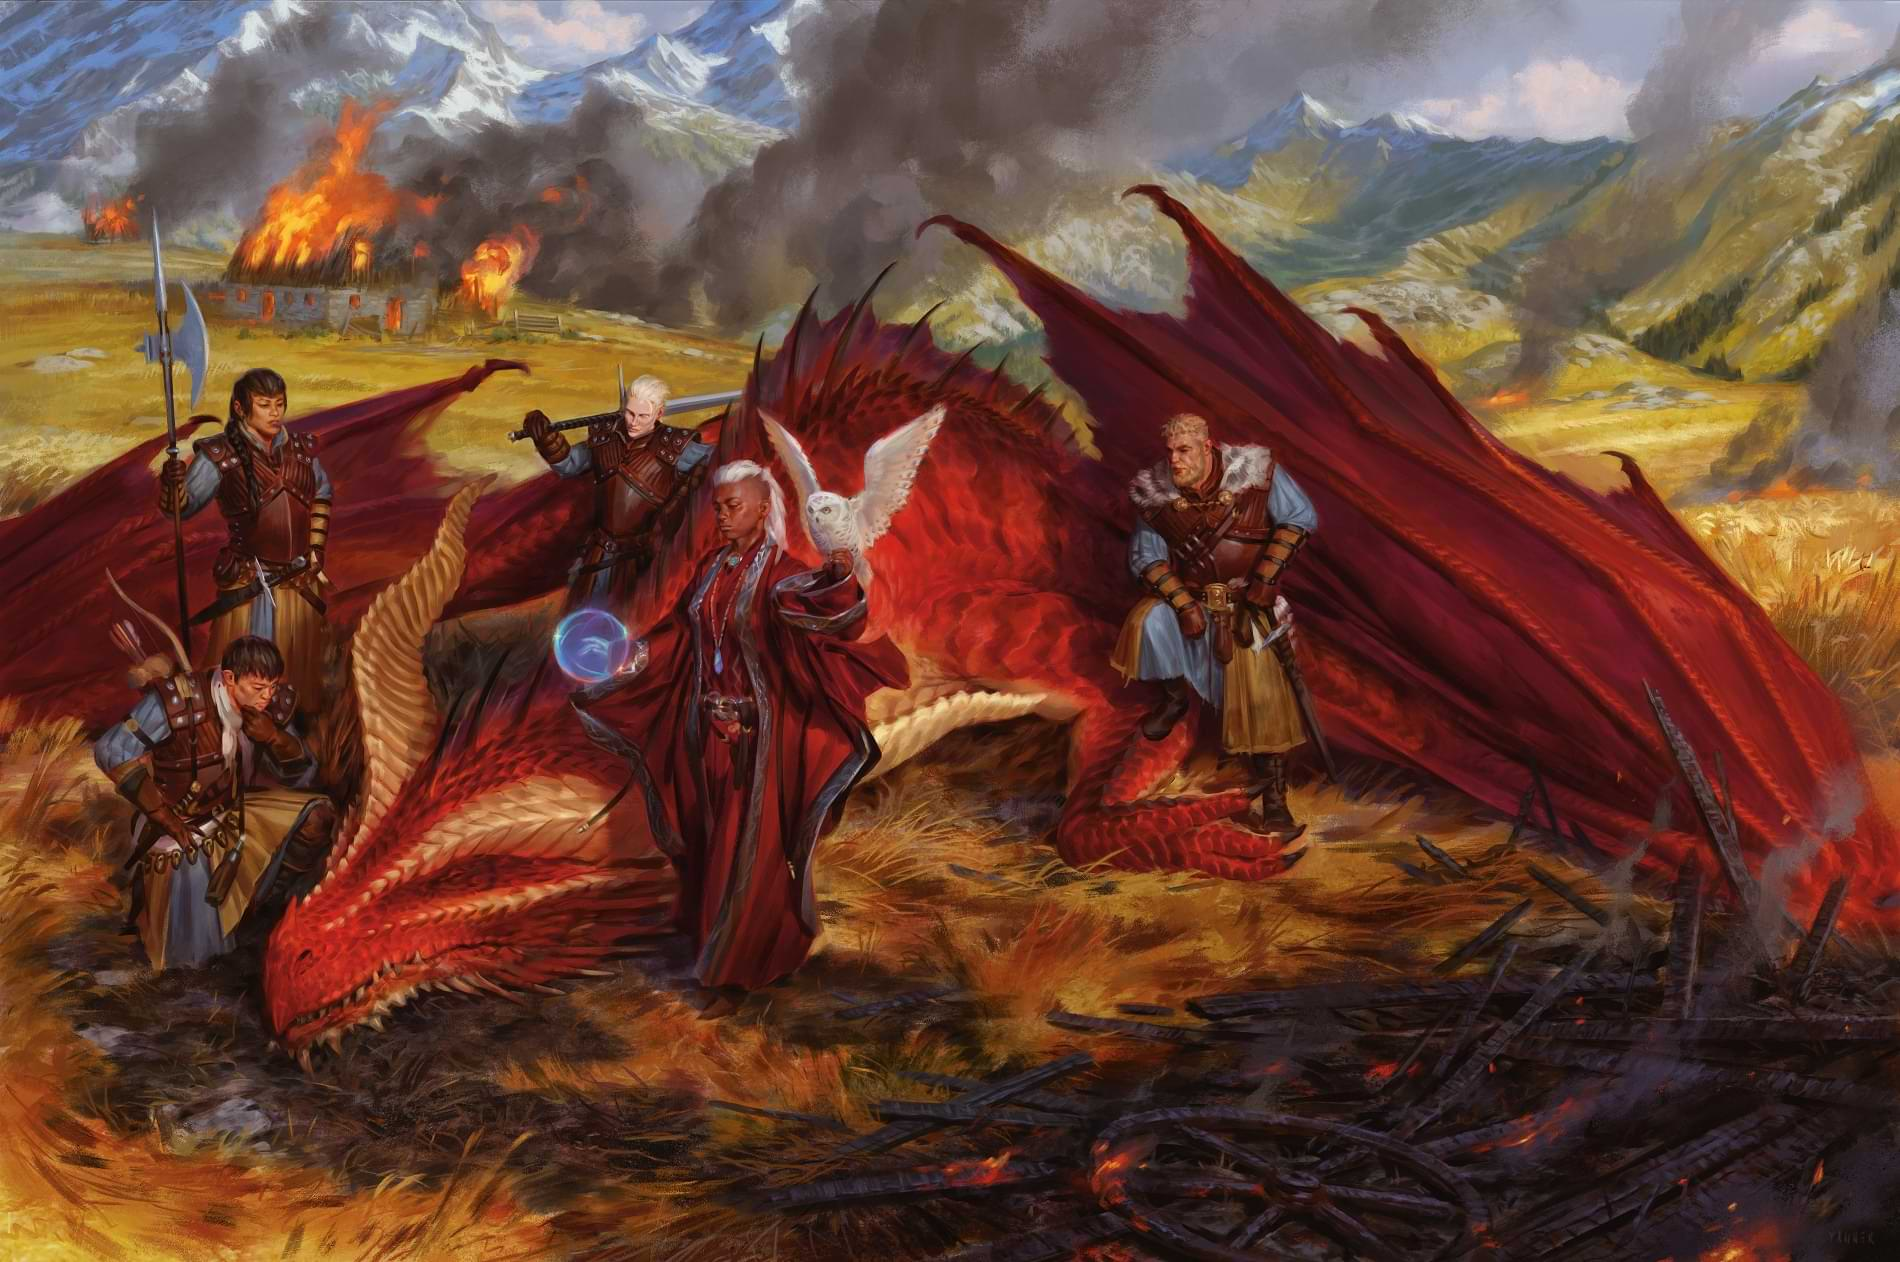 Five adventurers, one of them a sorcereress, examine the corpse of a Red Dragon amid the burning ruins of farm houses by Kieran Yanner for Dungeons & Dragons Dragonlance: Shadow of the Dragon Queen (2022) via Artstation